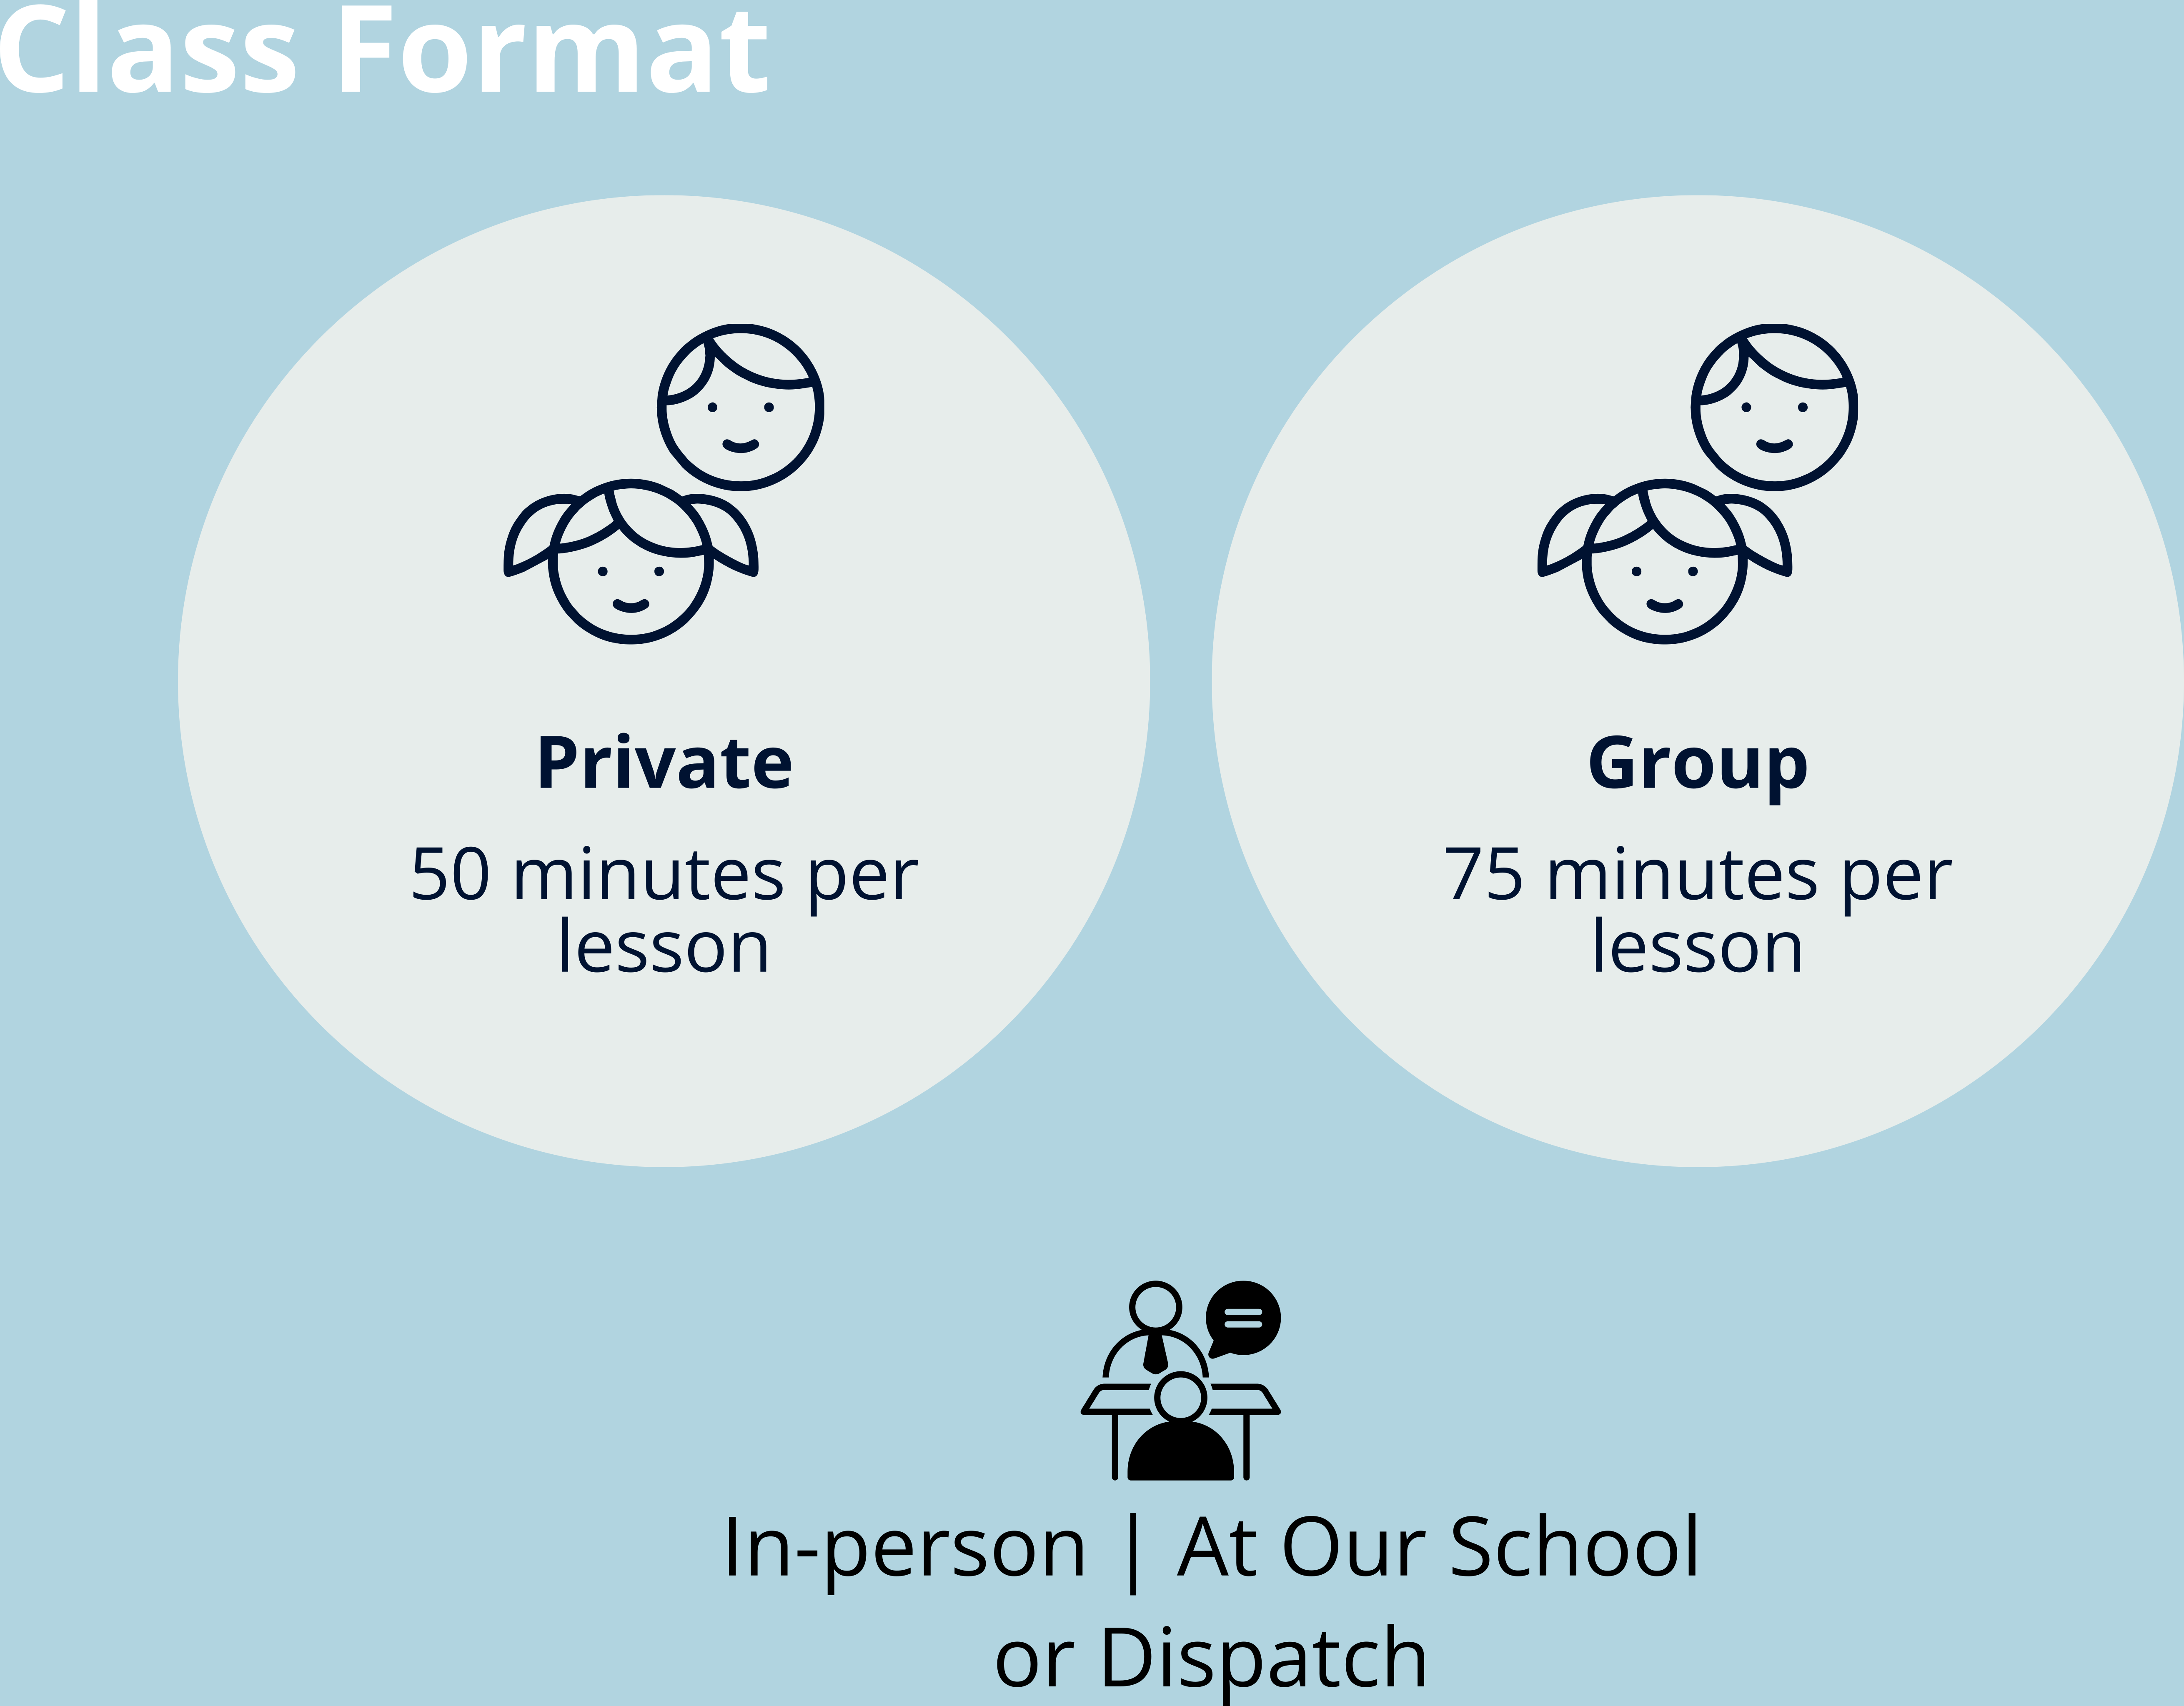 Class Format In-person | At Our School or Dispatch Private 50 minutes per lesson Group 75 minutes per lesson